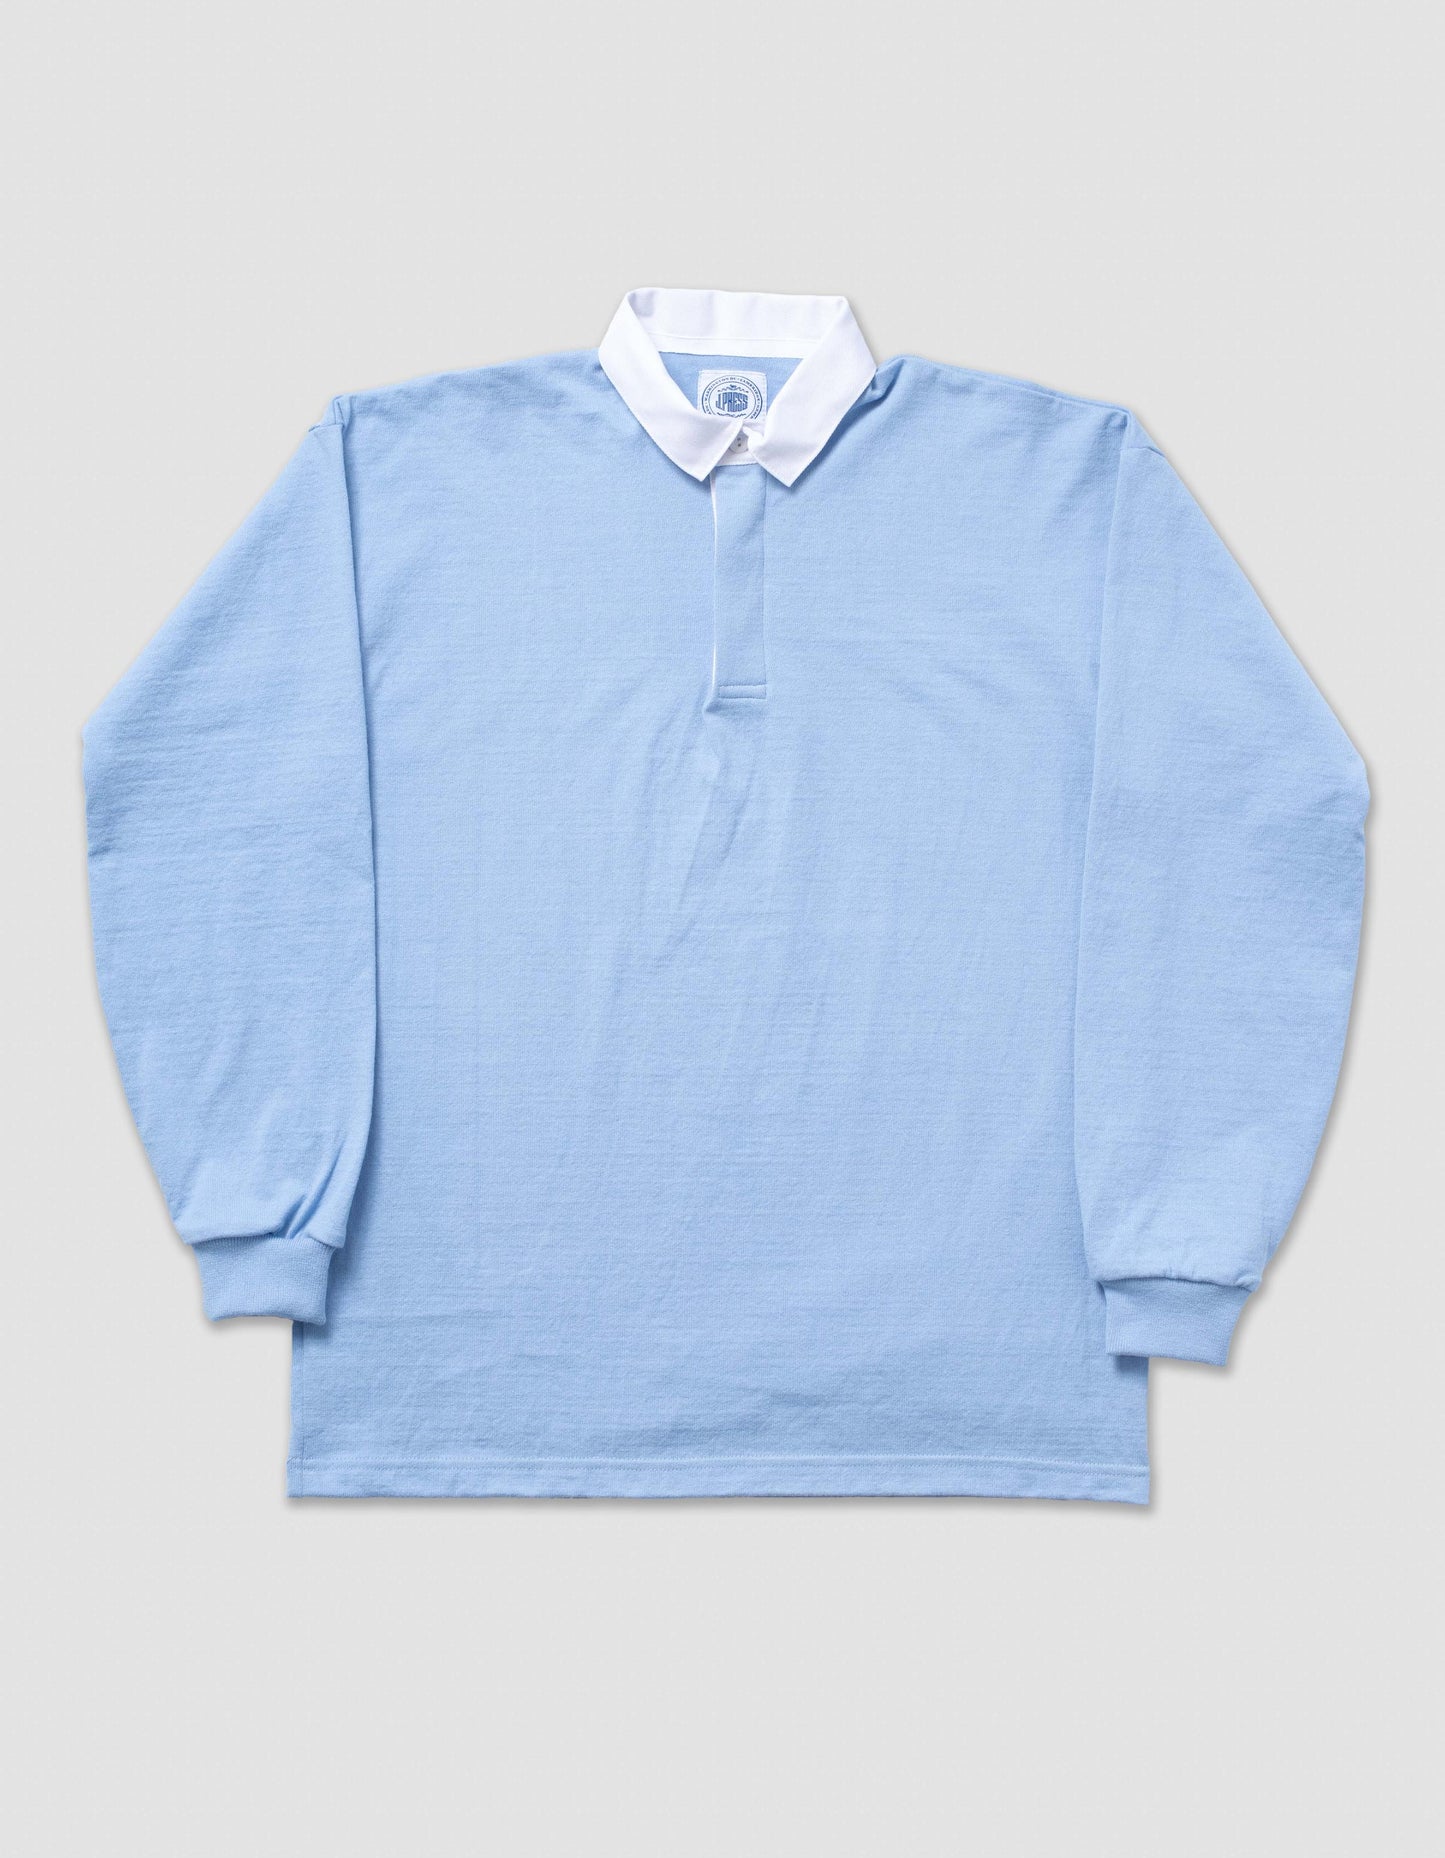 SOLID RUGBY - LIGHT BLUE